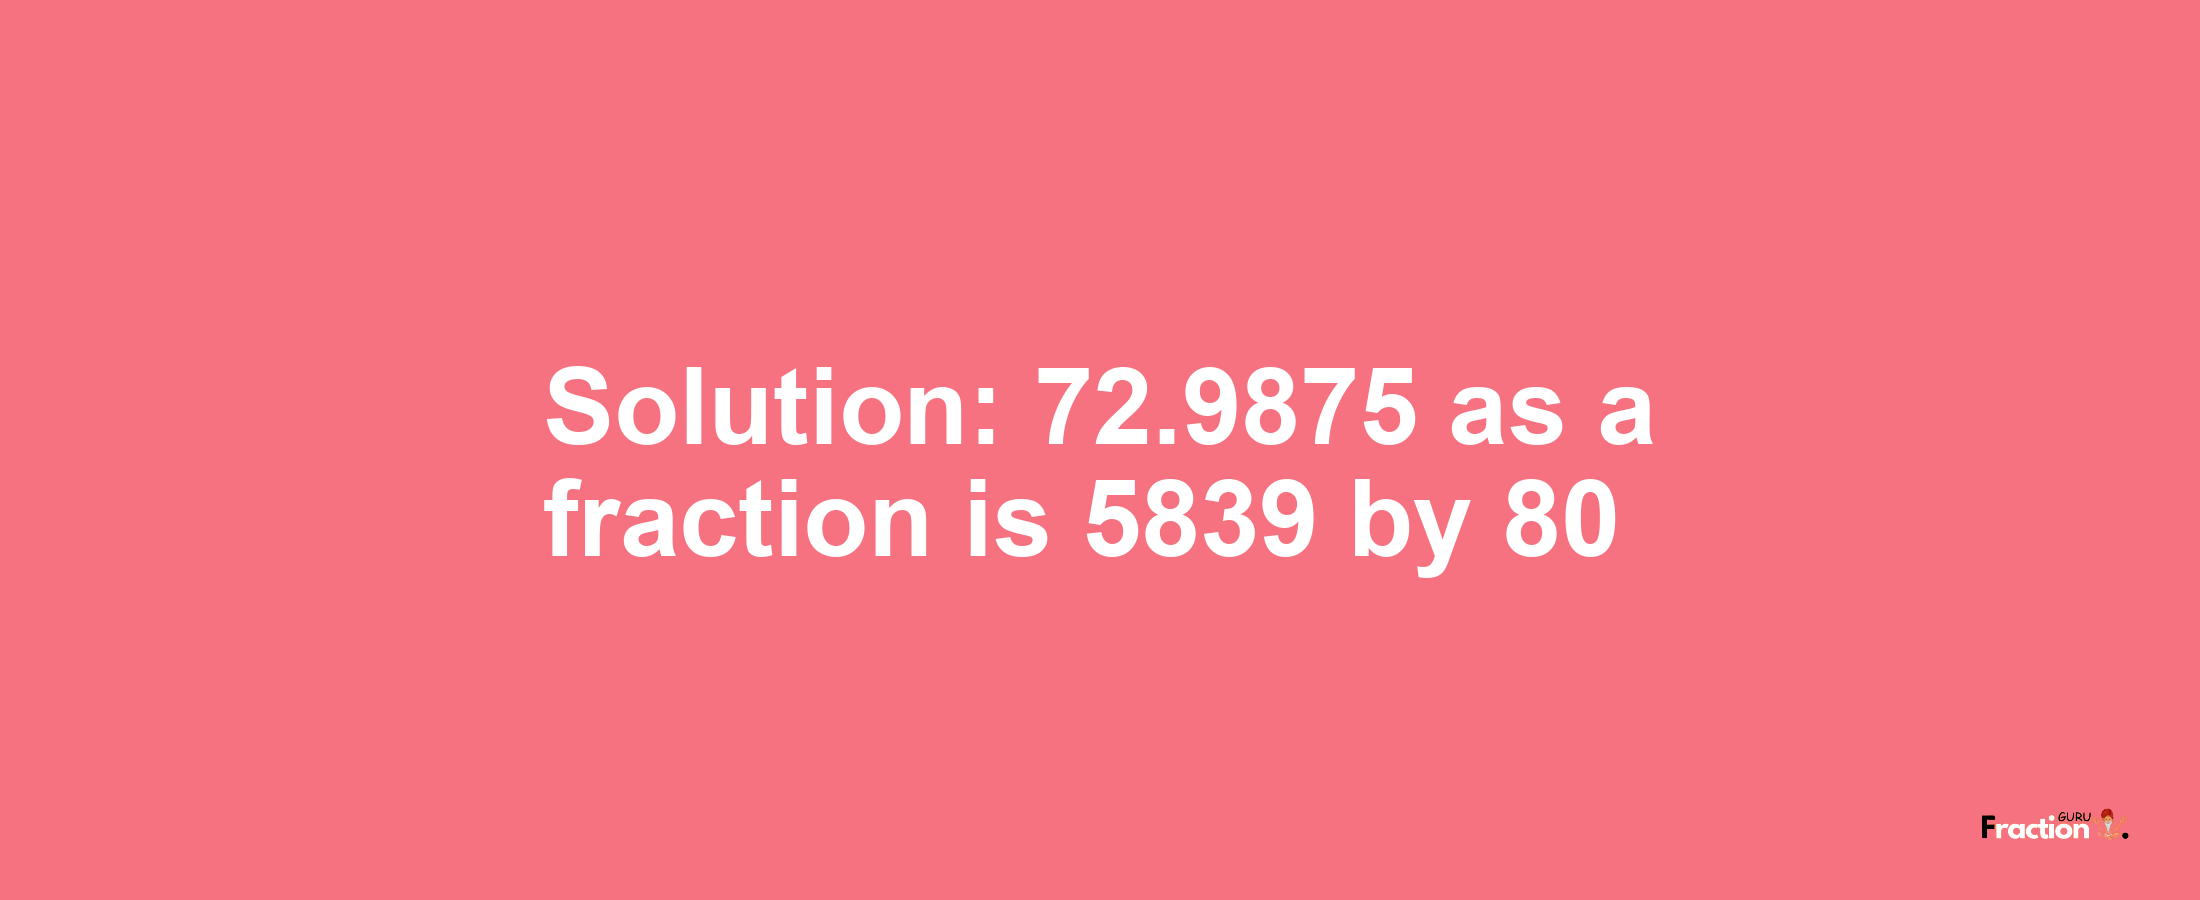 Solution:72.9875 as a fraction is 5839/80